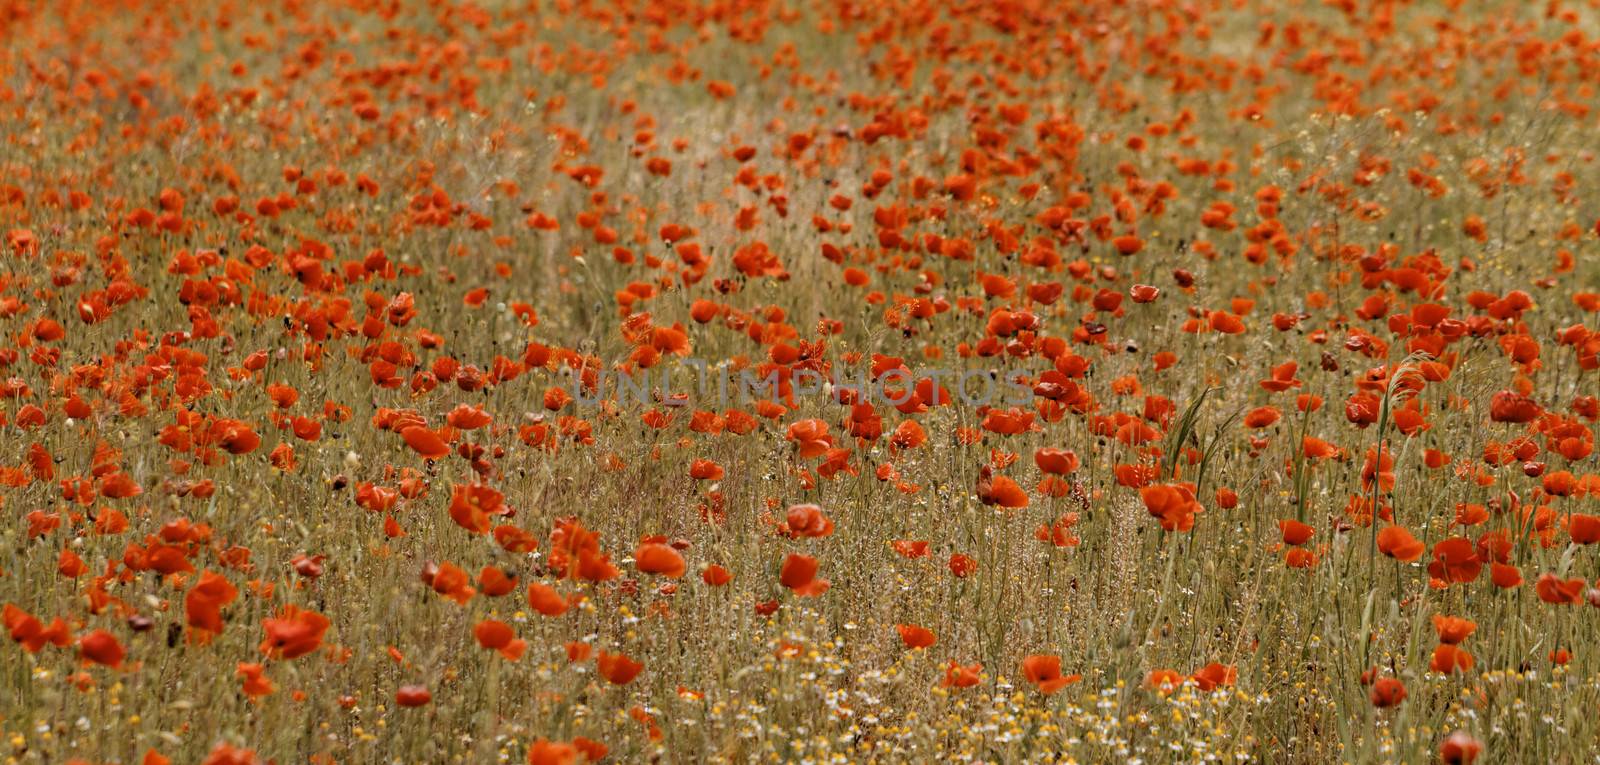 Red poppies blooming in the wild meadow